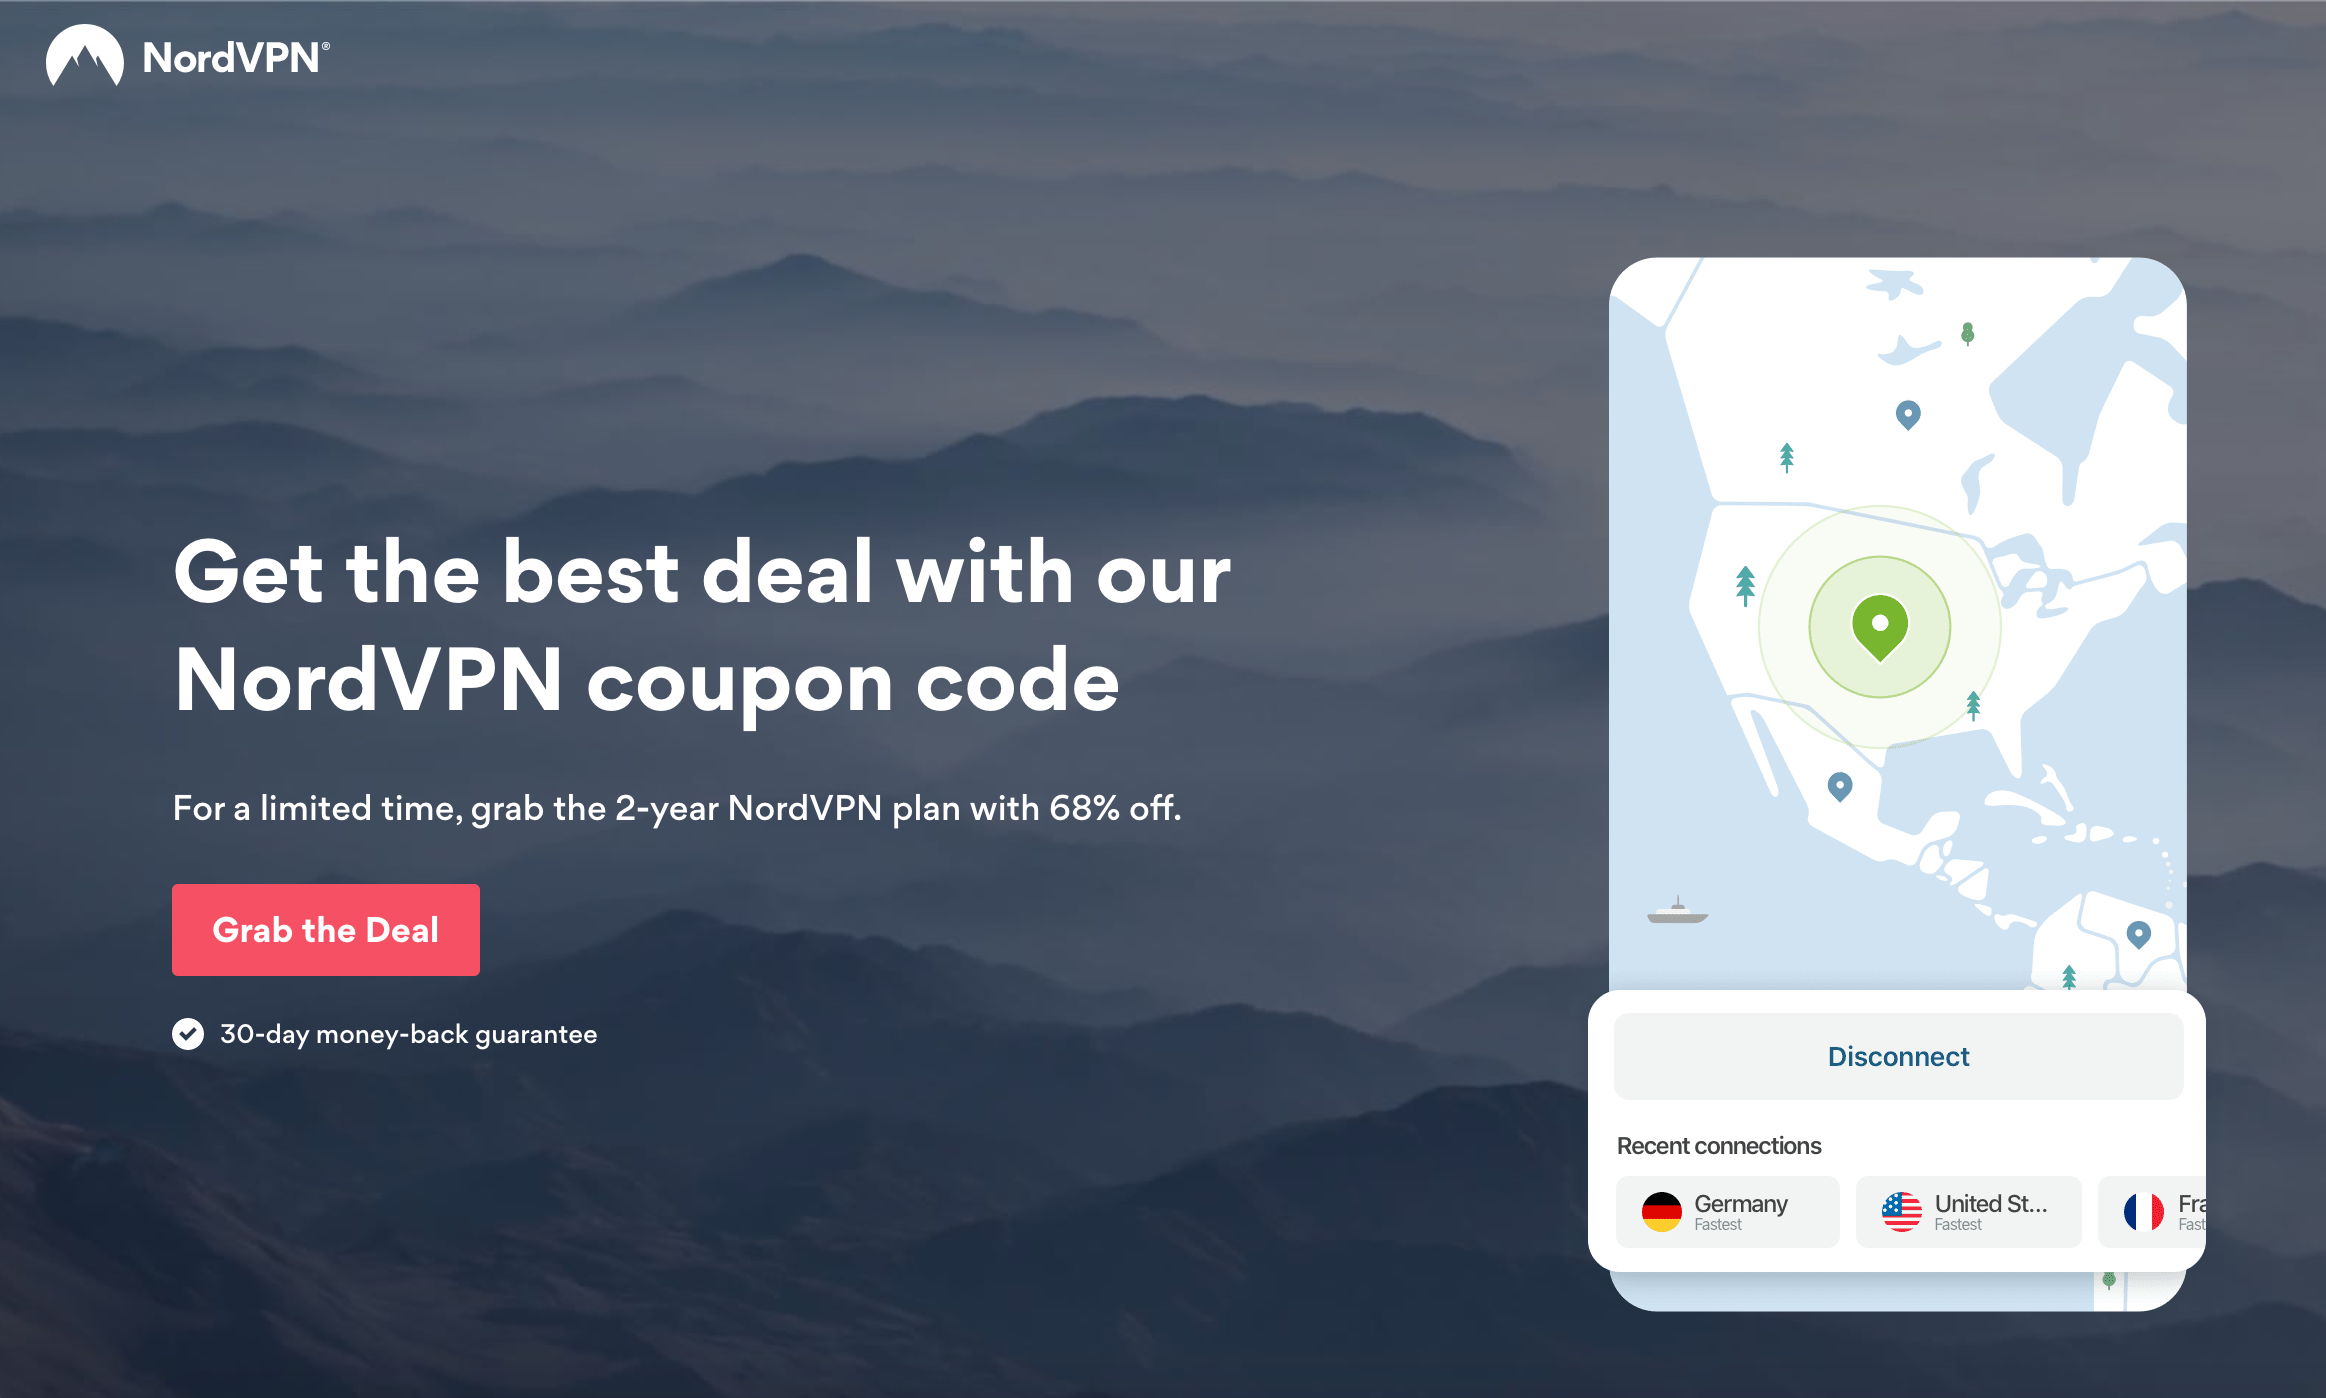 NordVPN coupon code for 68% OFF.